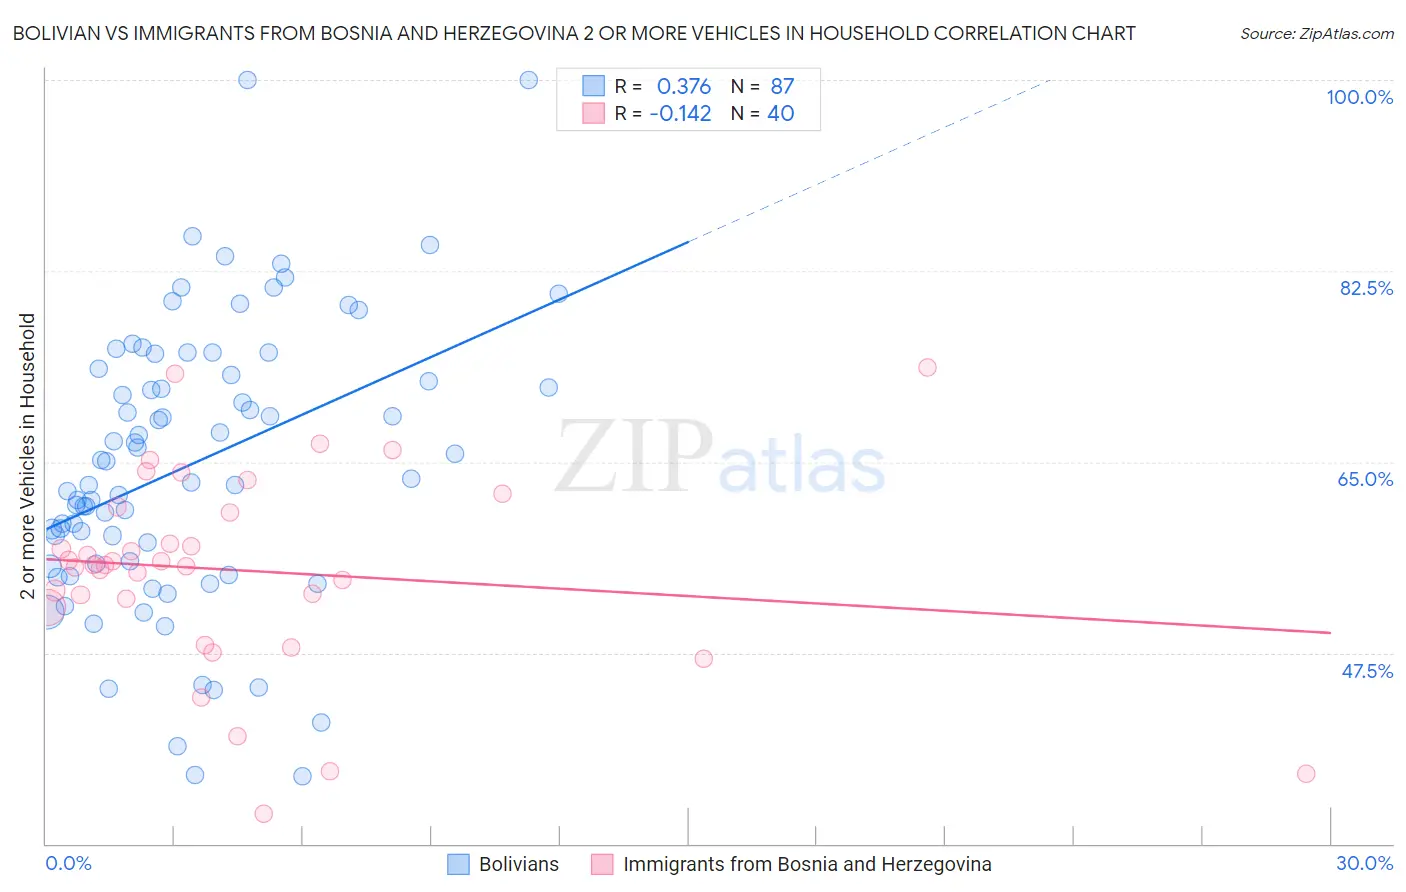 Bolivian vs Immigrants from Bosnia and Herzegovina 2 or more Vehicles in Household